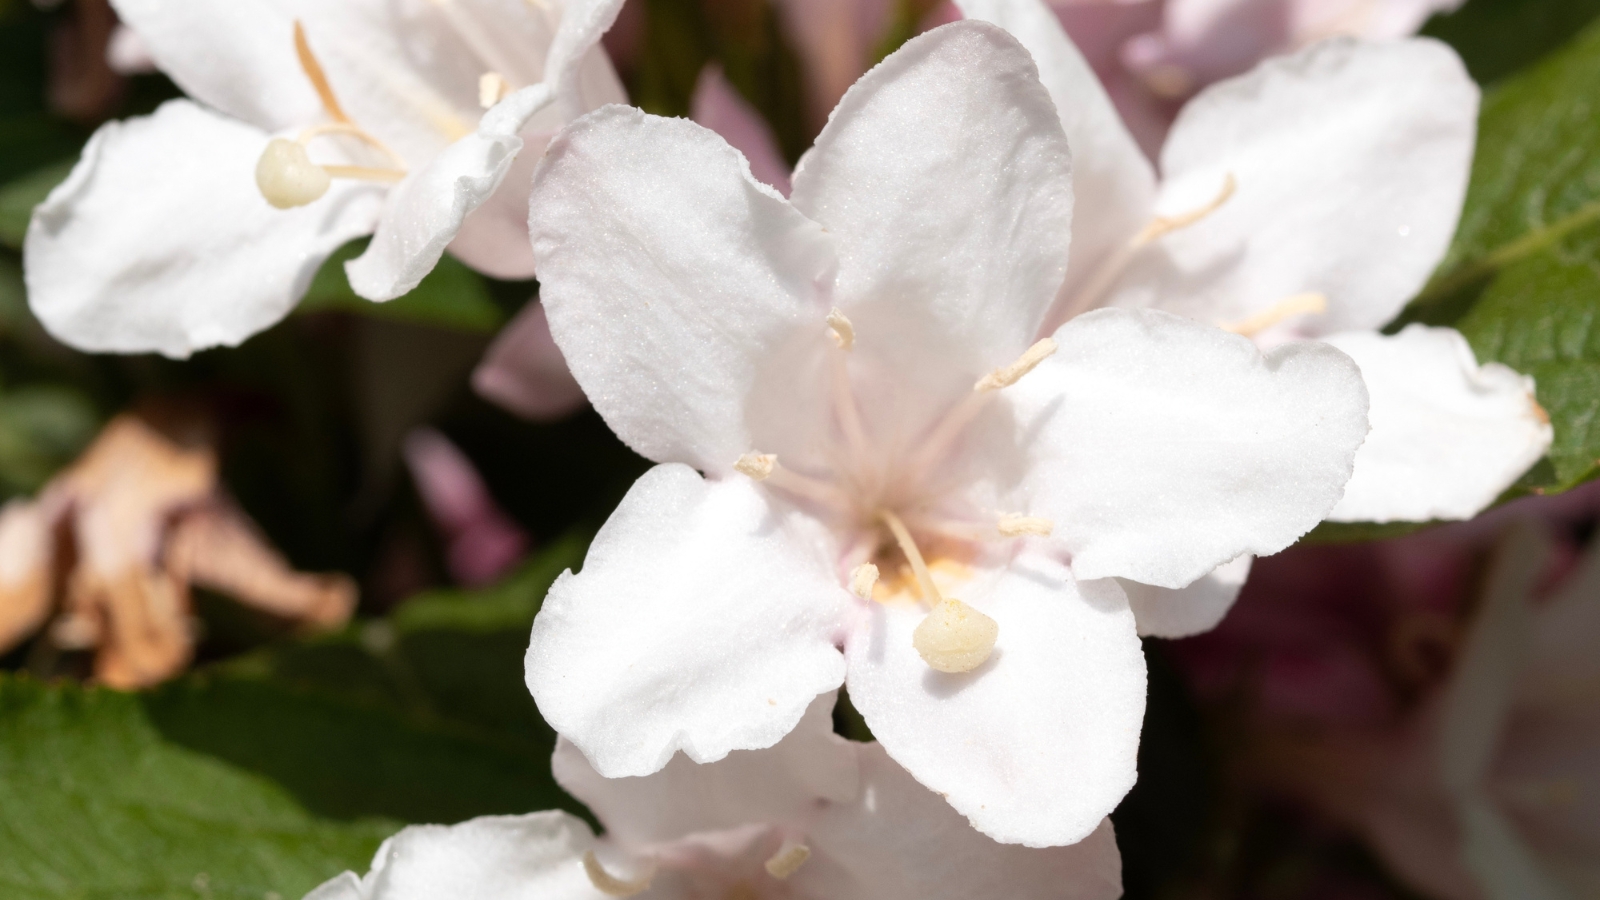 A close-up of white 'Tuxedo' weigela flowers, their delicate petals capturing the light, revealing intricate patterns and subtle hues, a serene portrait of nature's elegance in bloom.